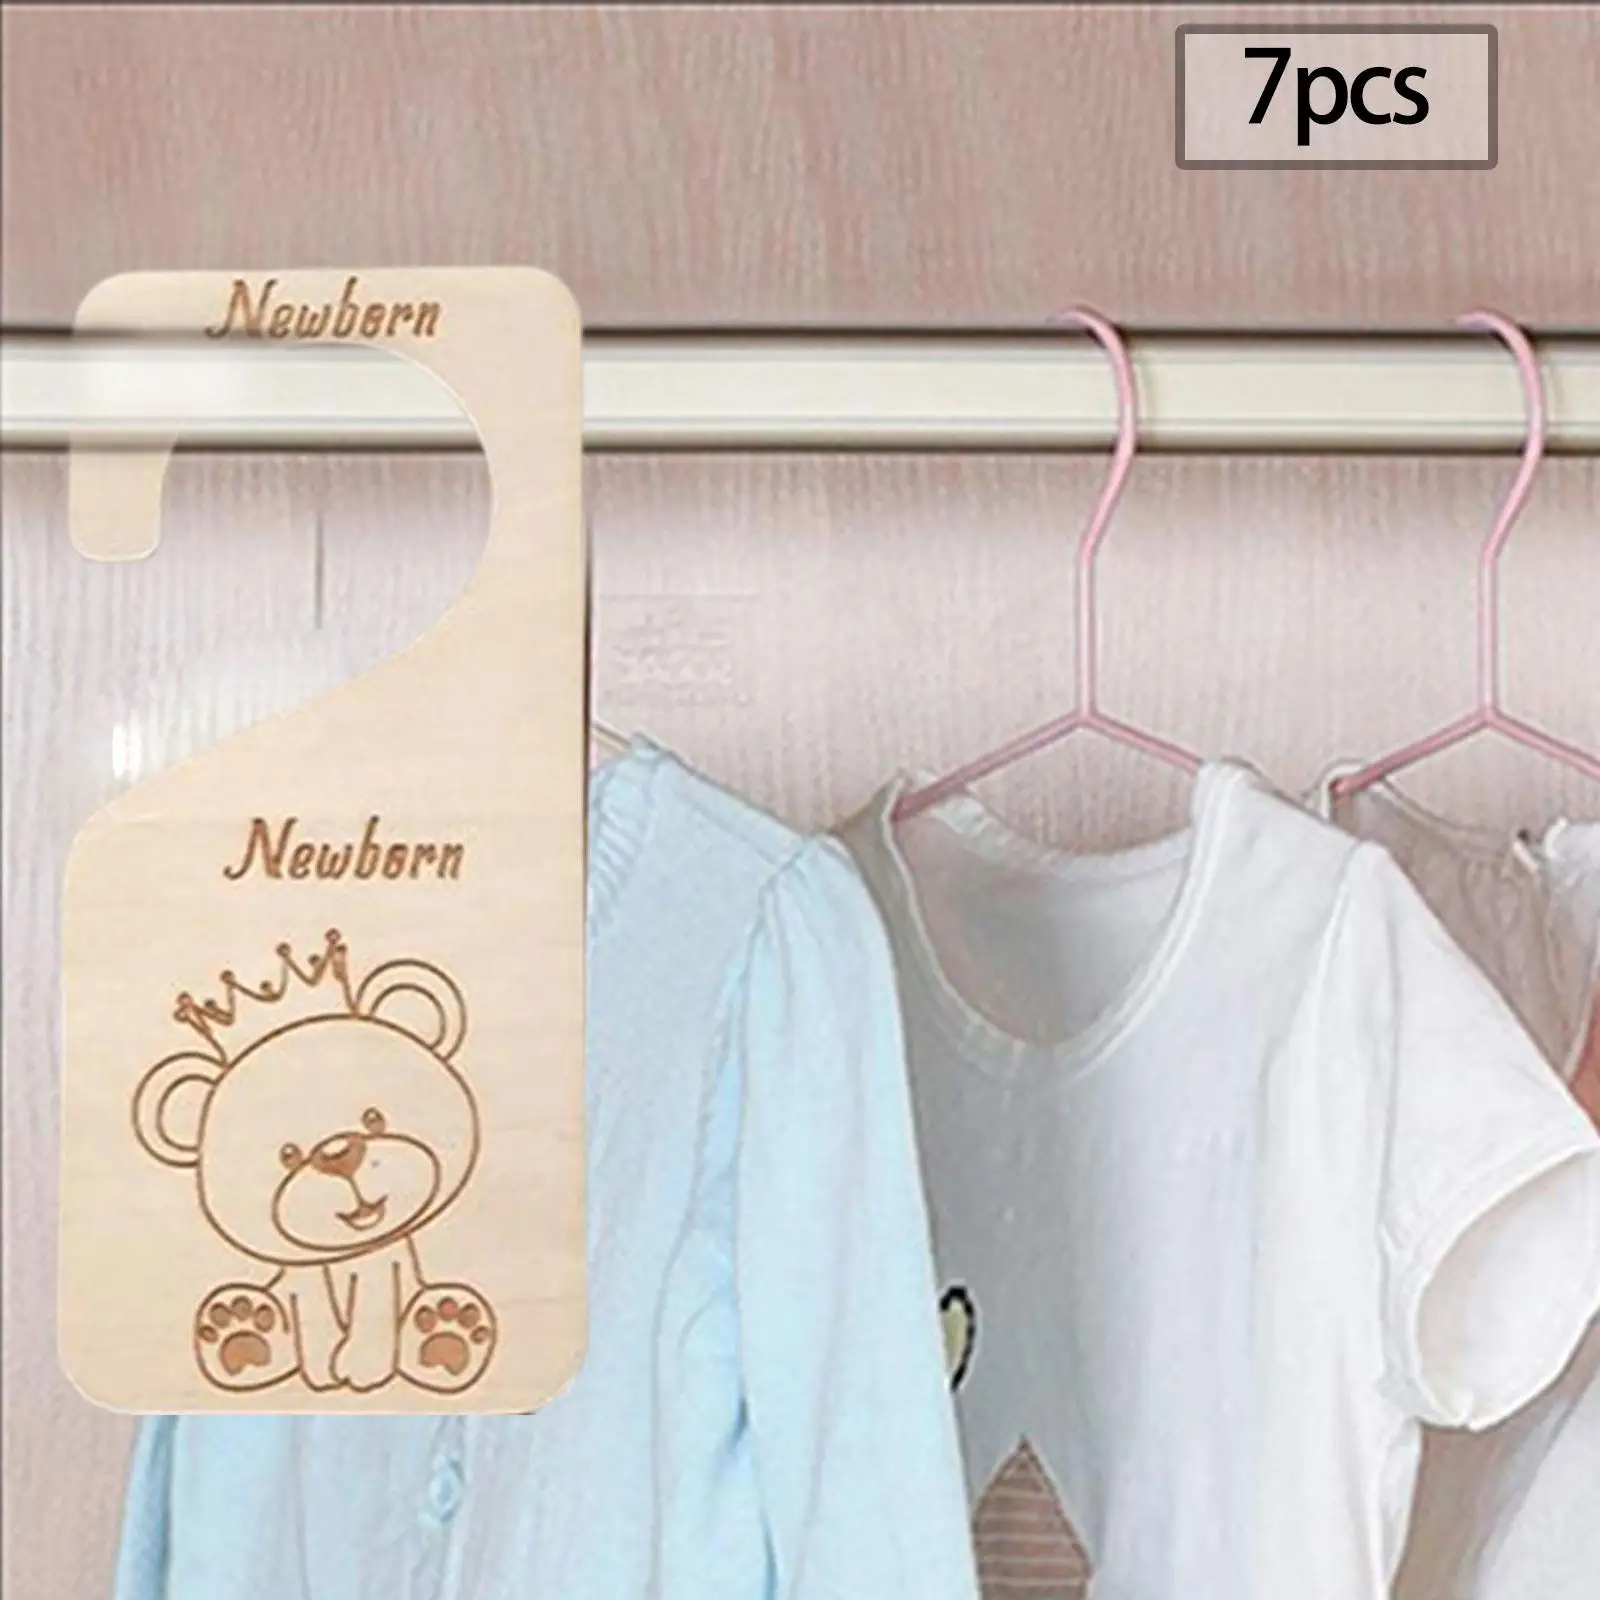 7x Adorable Newborn Baby Toddler Clothes Dividers Nursery Clothes Organizers Hanging Clothes Dividers for Closet Wardrobe